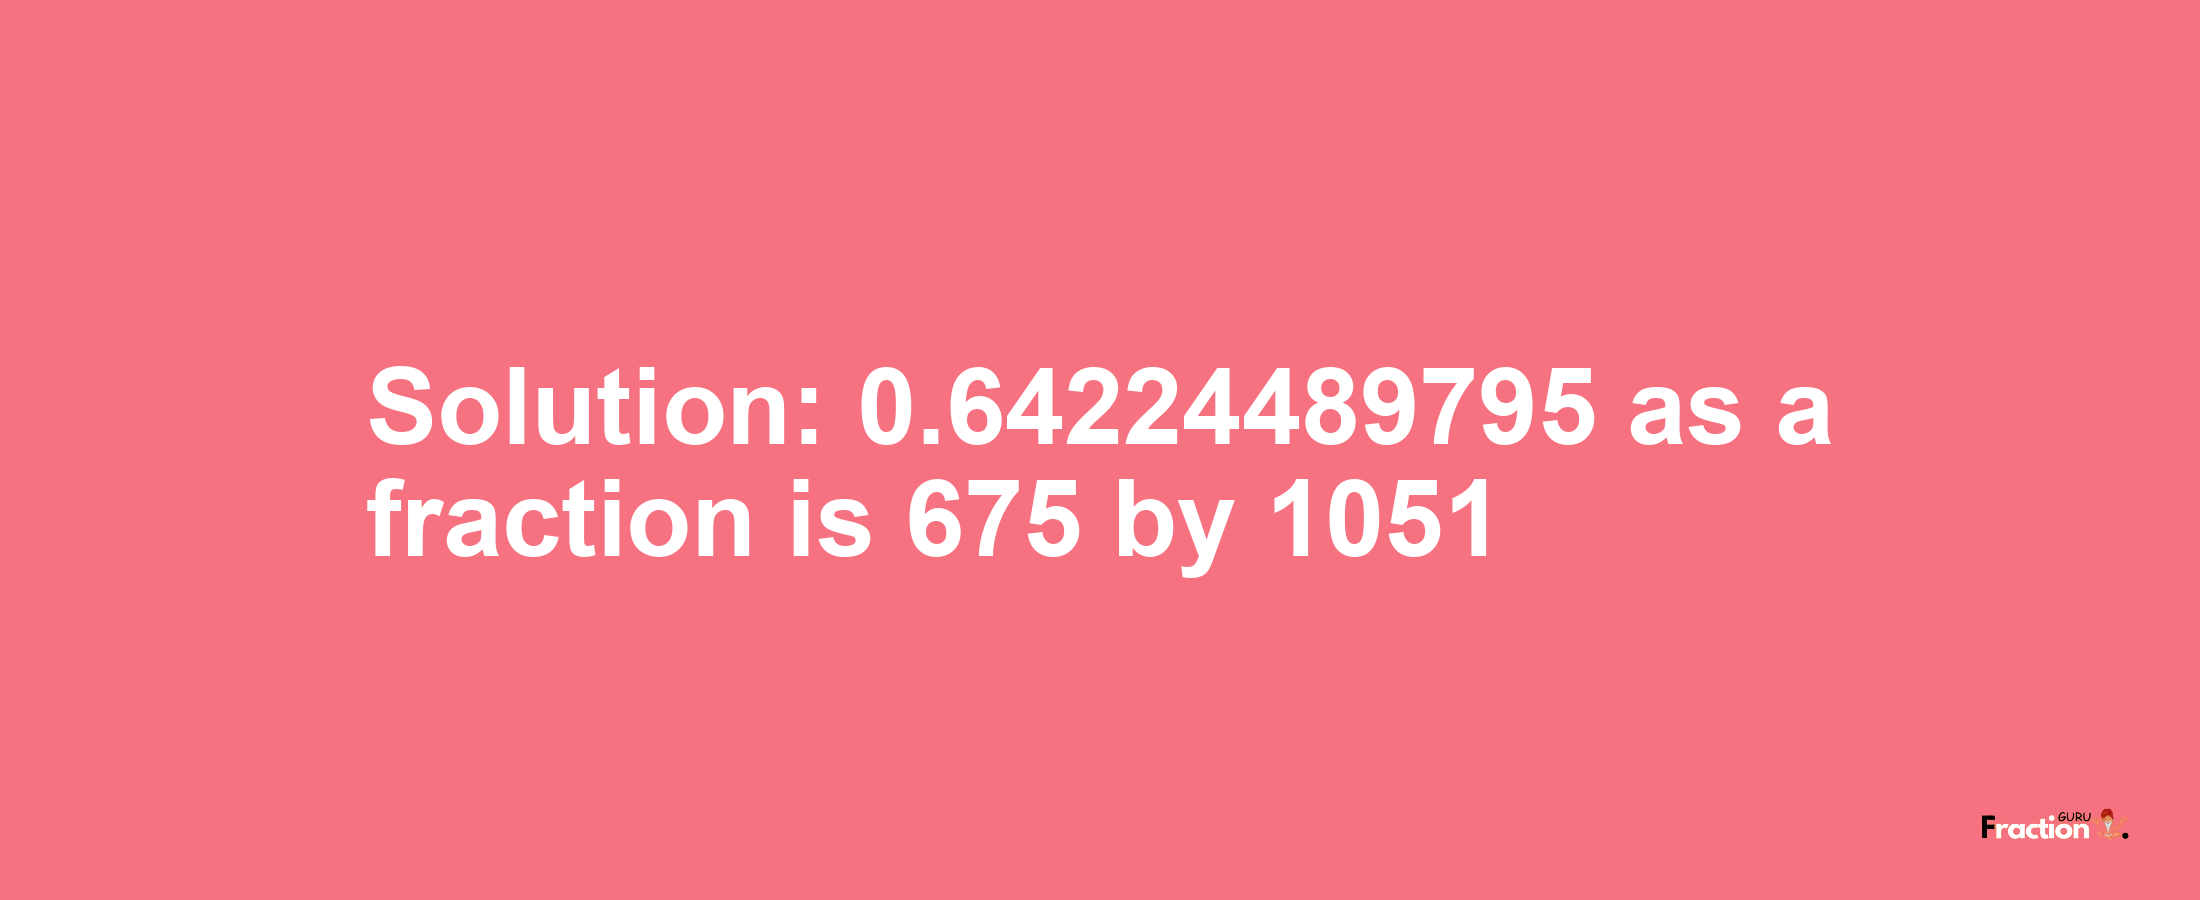 Solution:0.64224489795 as a fraction is 675/1051